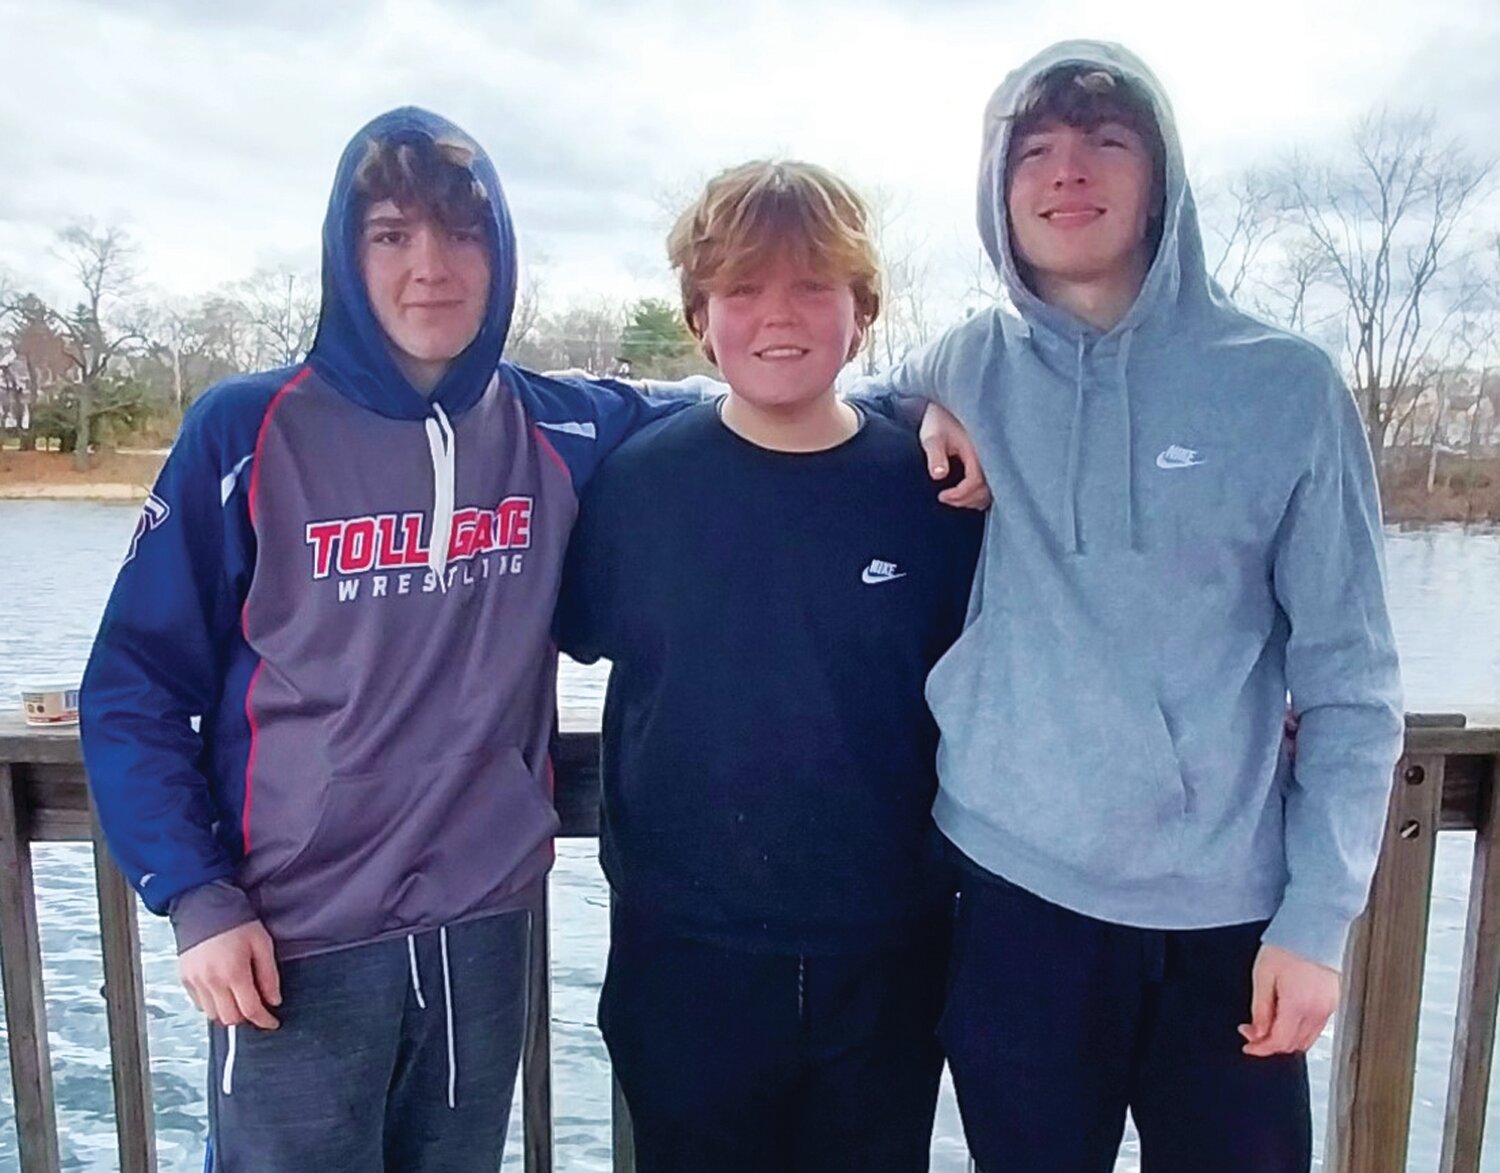 SLOW BITE: Anglers George Homes, Jr., Reece Quinn and Even Oldrid ,Tollgate High School students, said the trout bite at Gordon’s Pond slowed Saturday morning as a weather front moved in. (Submitted photos)